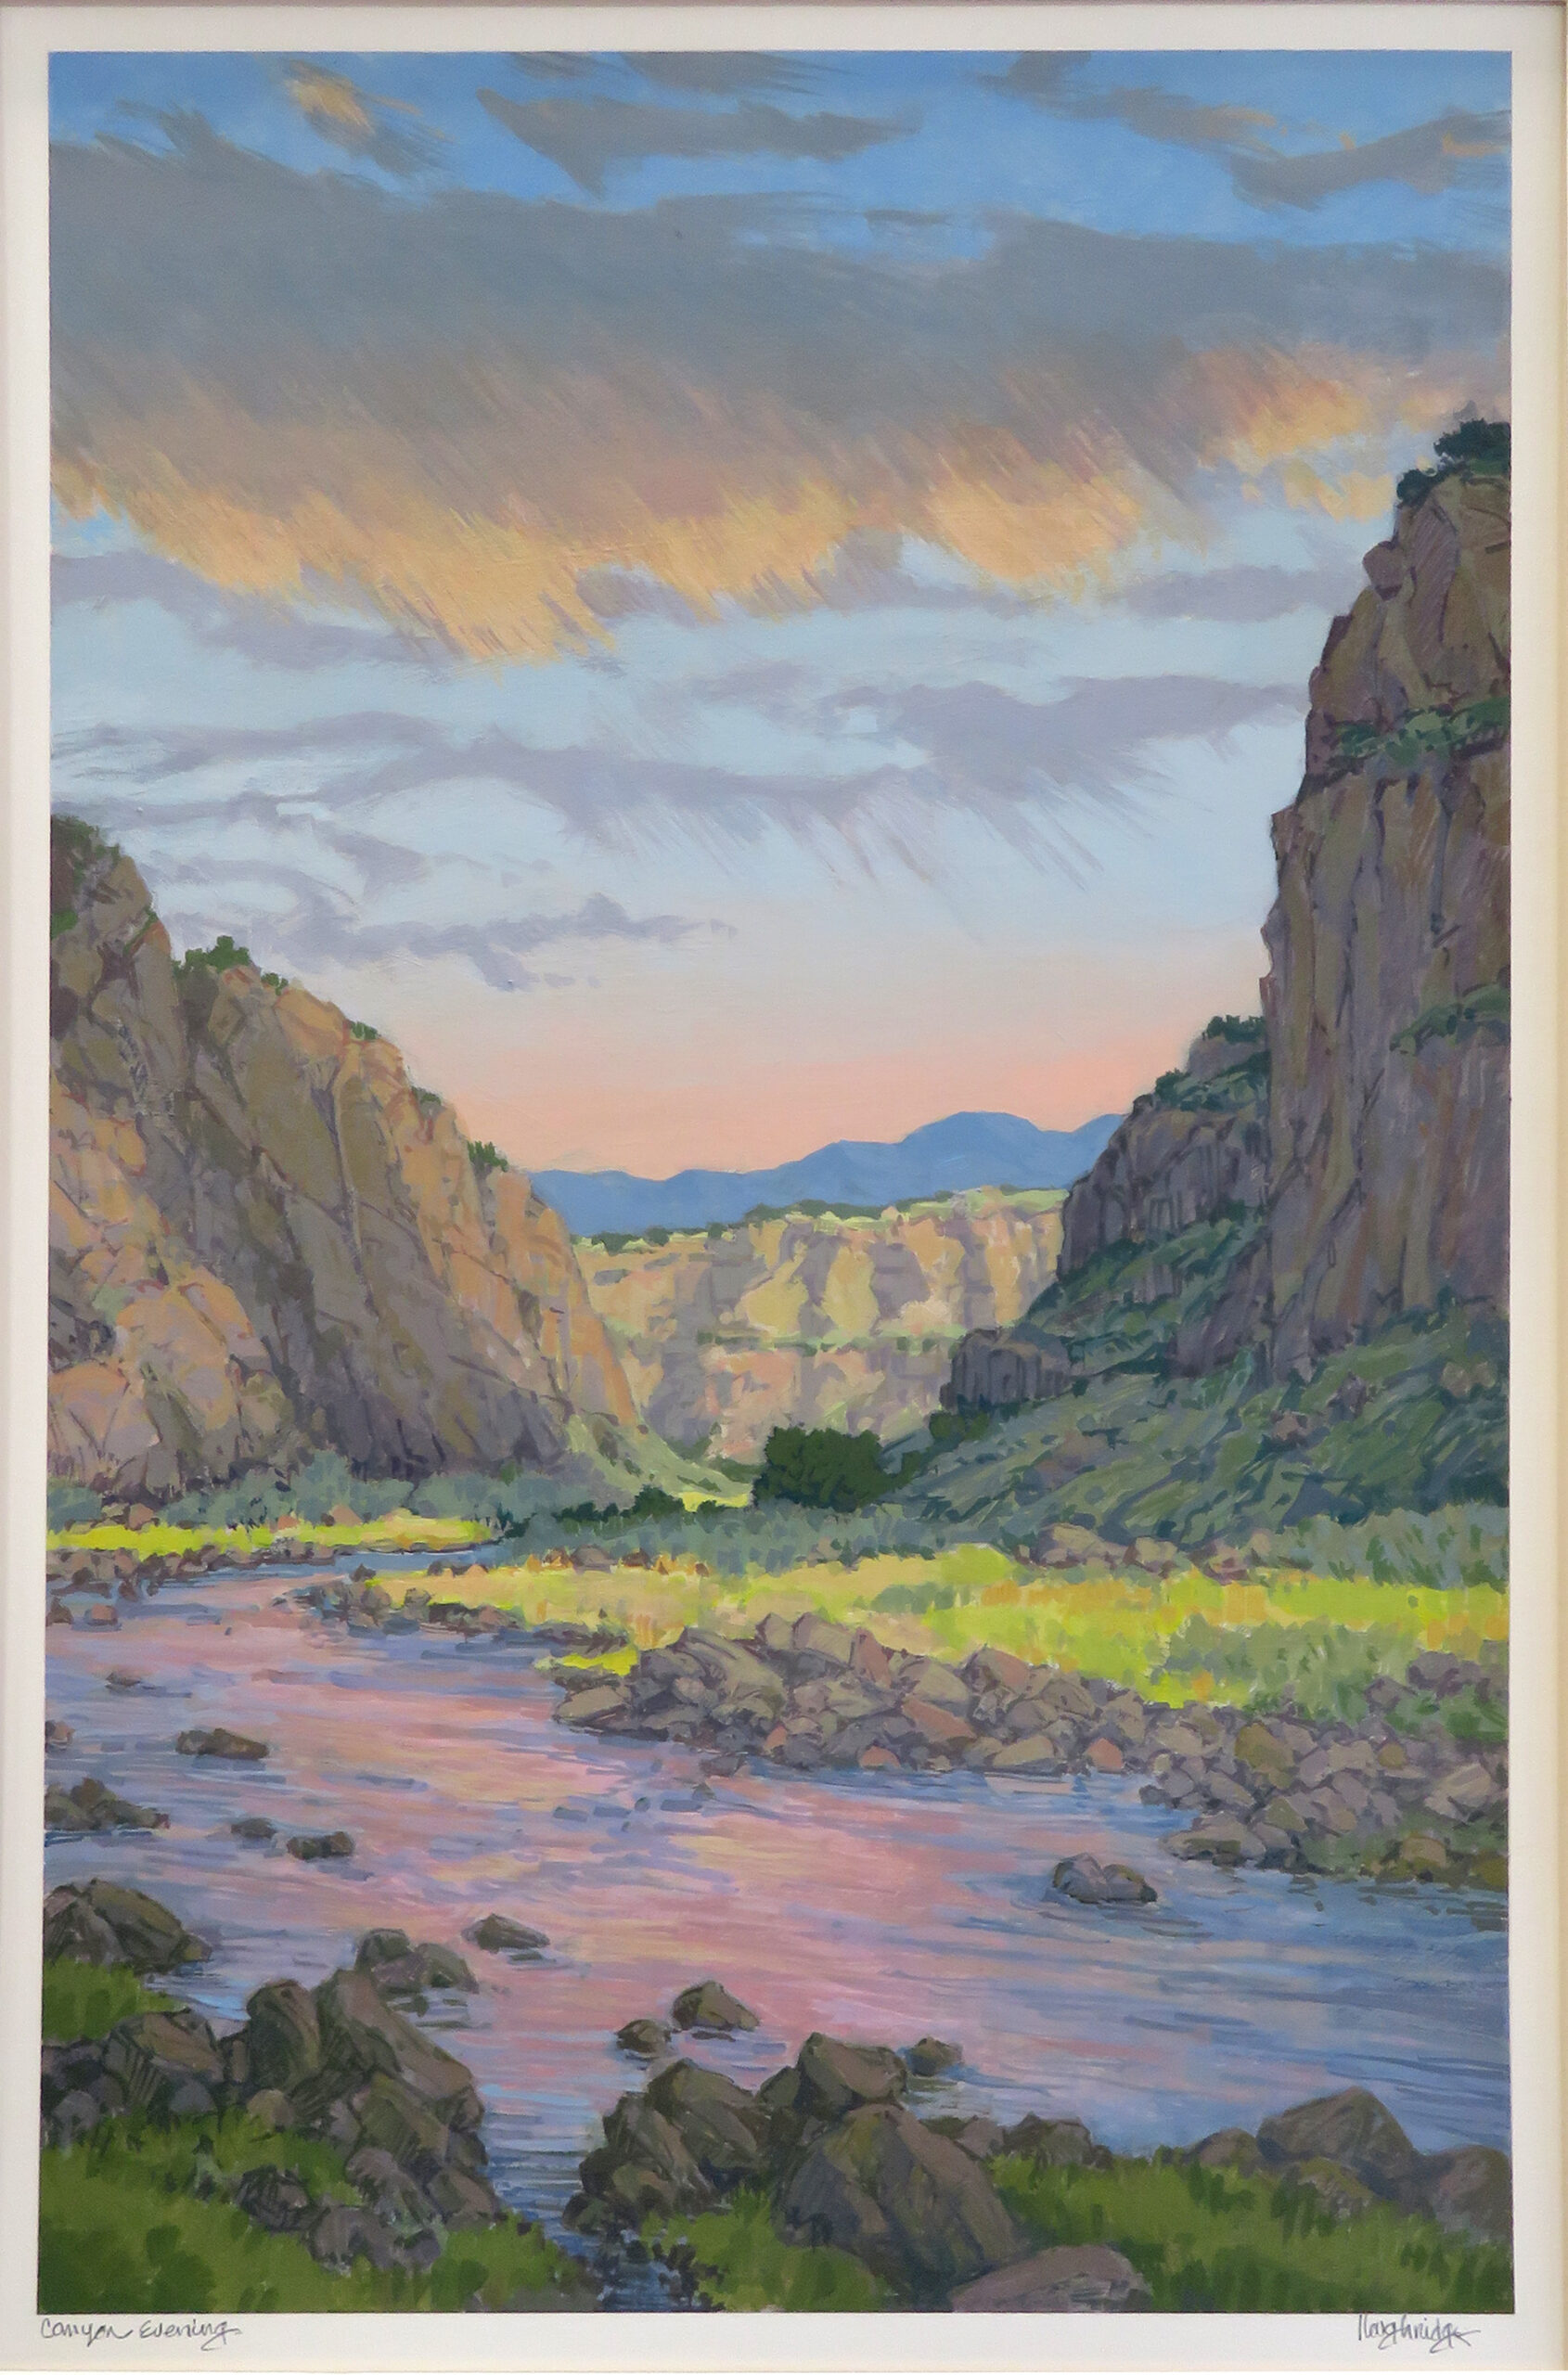 
							

									Leon Loughridge									Canyon Evening 									water based paint on paper<br />
22 x 14 inches									


							